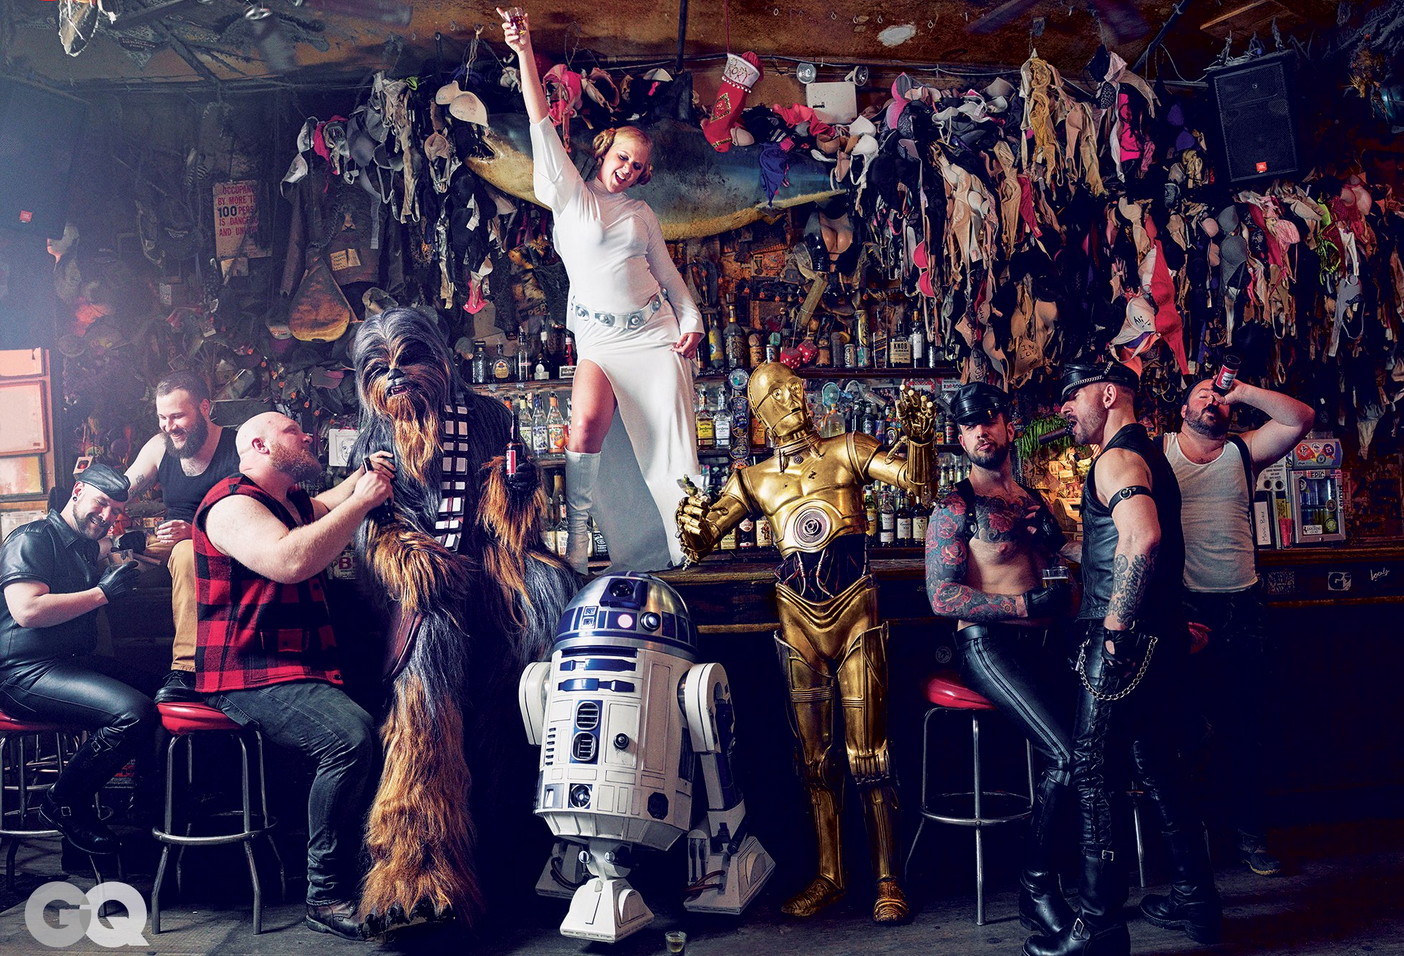 Amy Schumer Star Wars Parody Gq Spread Displeases Lucasfilm The Mary Sue